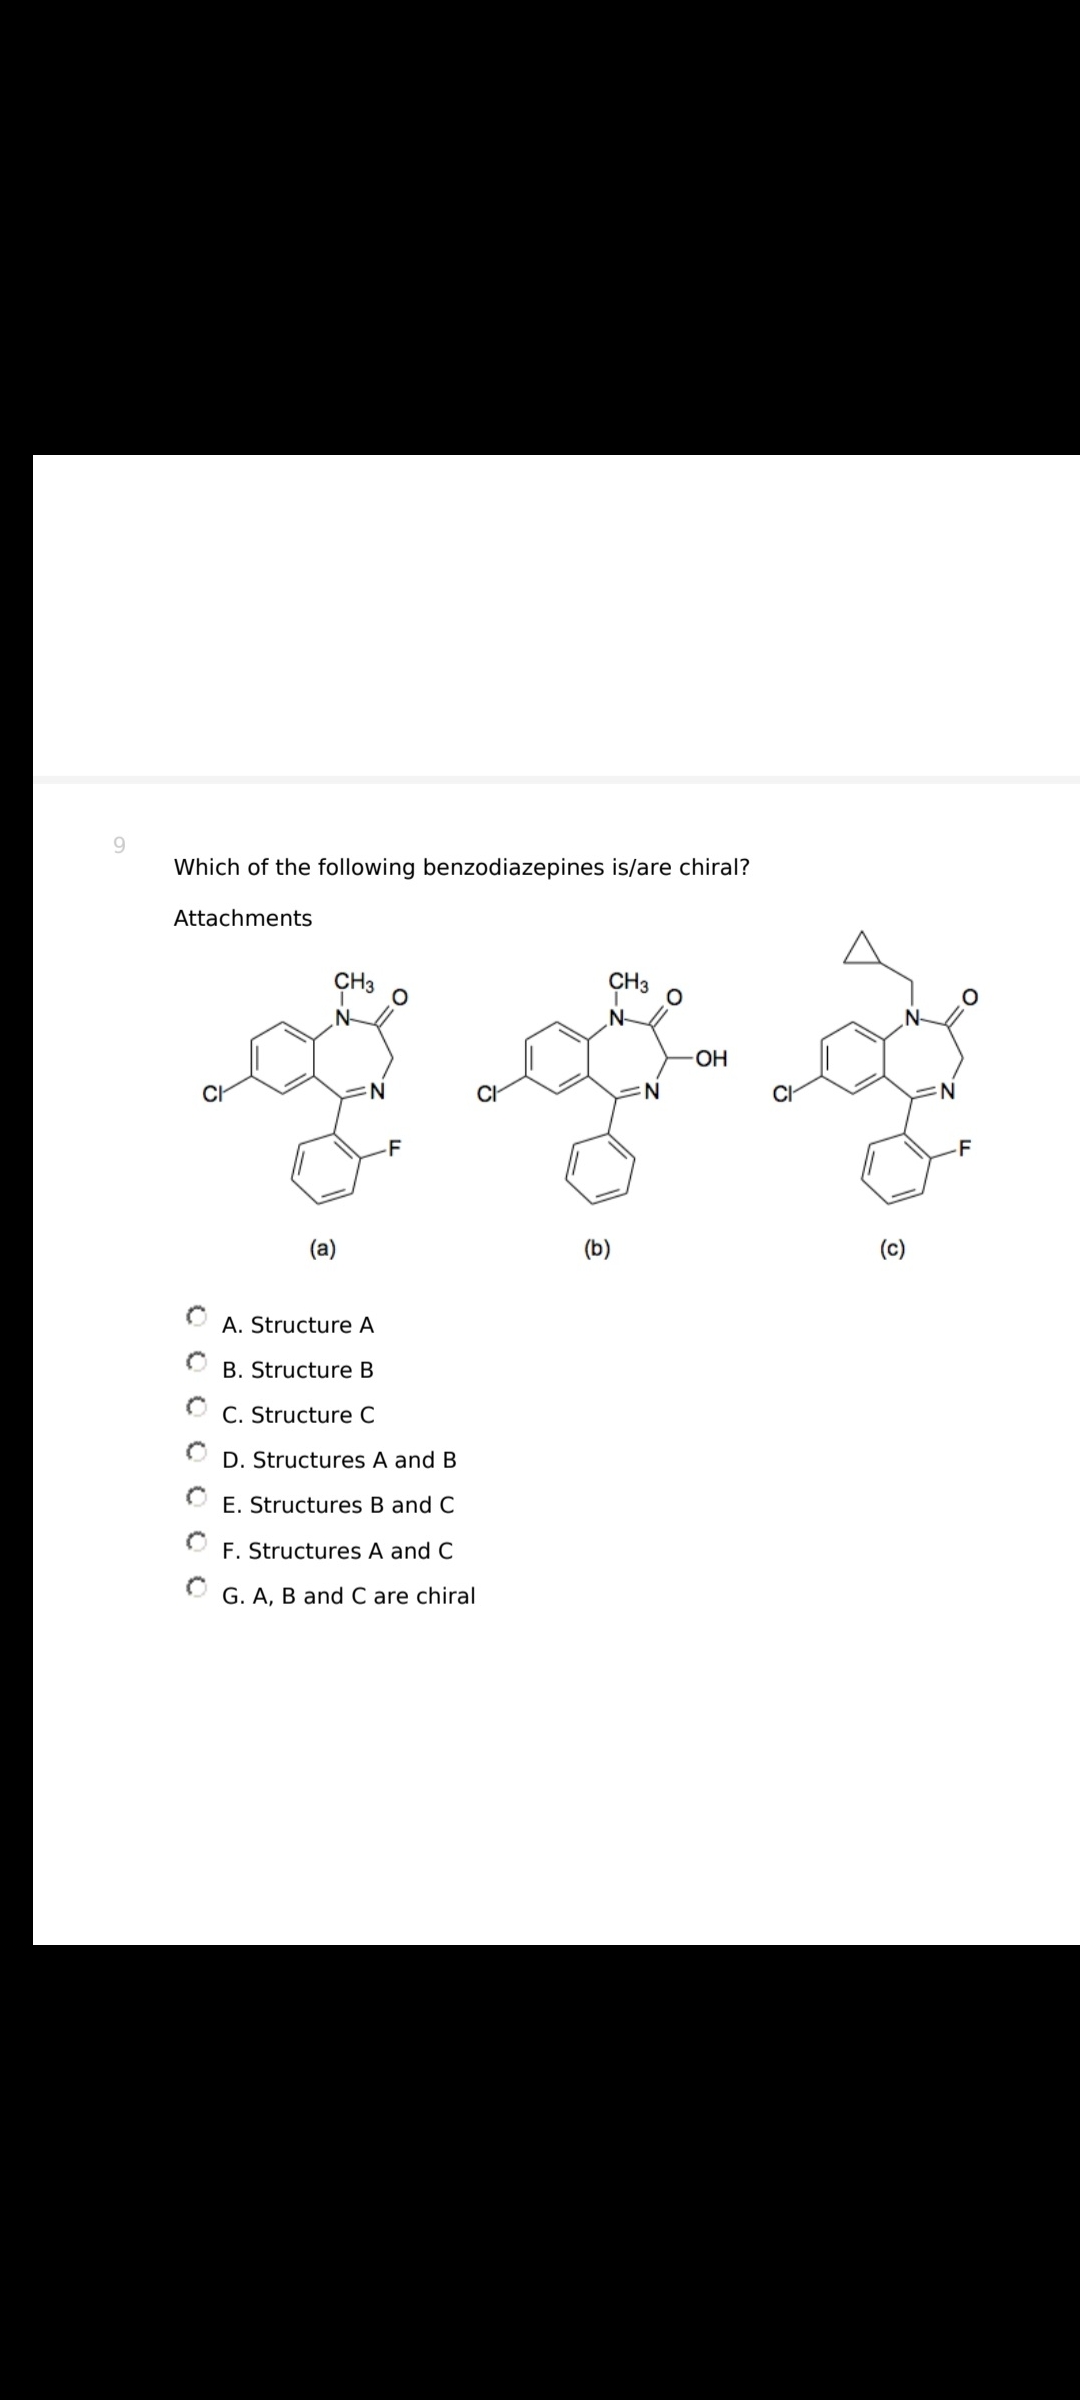 Which of the following benzodiazepines is/are chiral?
Attachments
CH3
zag
OH
N
(b)
CH3
(a)
N
-F
A. Structure A
B. Structure B
C. Structure C
D. Structures A and B
E. Structures B and C
F. Structures A and C
G. A, B and C are chiral
(c)
N
-F